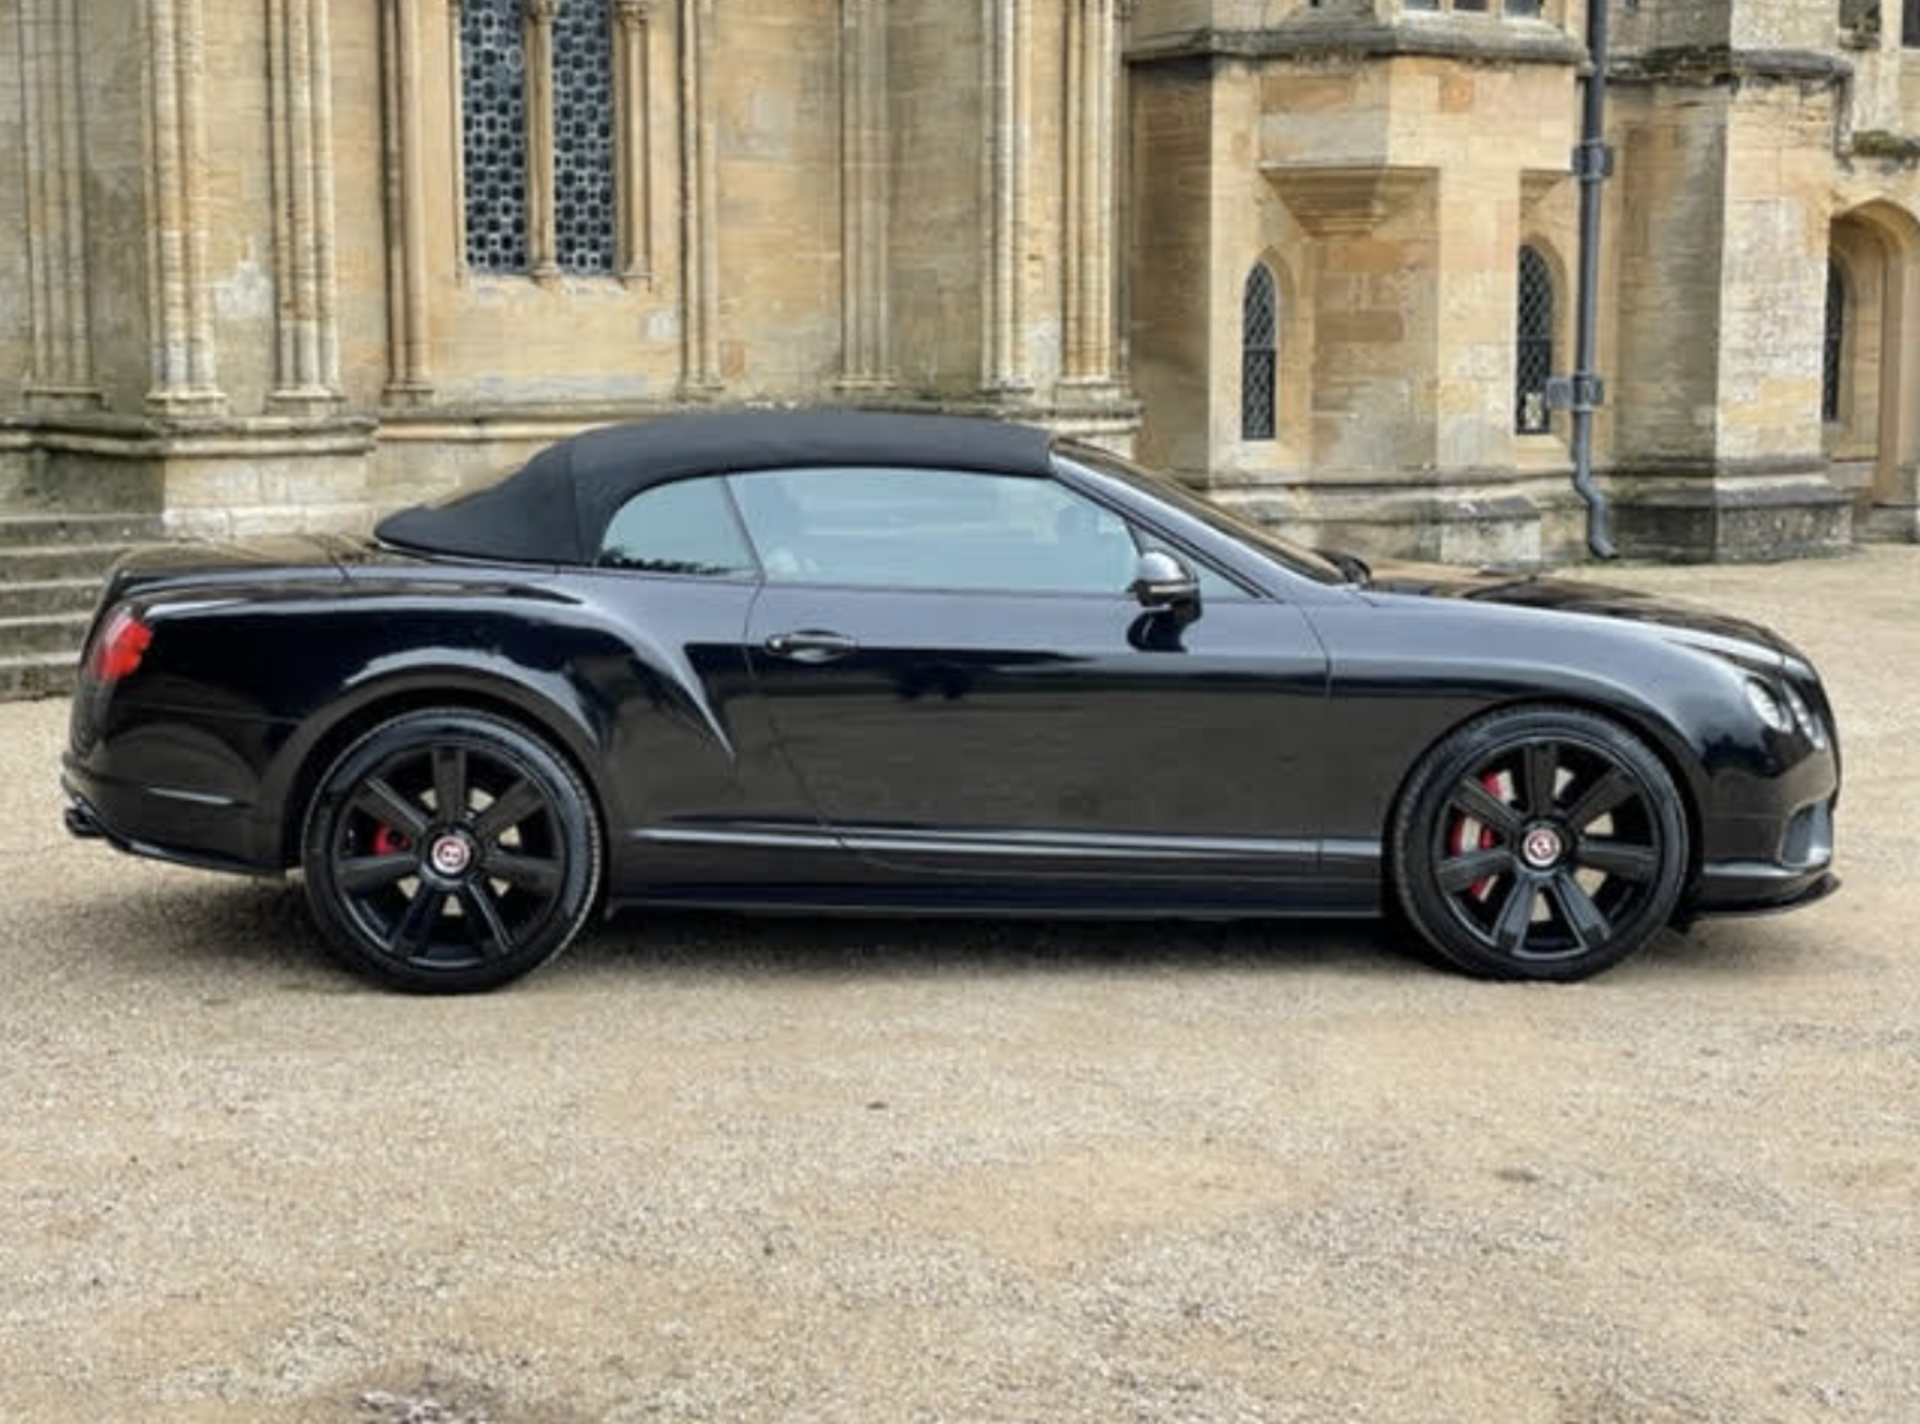 2015 Bentley Continental GTC 4.0 V8 S 2dr Auto Concourse series - Black pack 58,000 miles Full S/H - Image 8 of 18